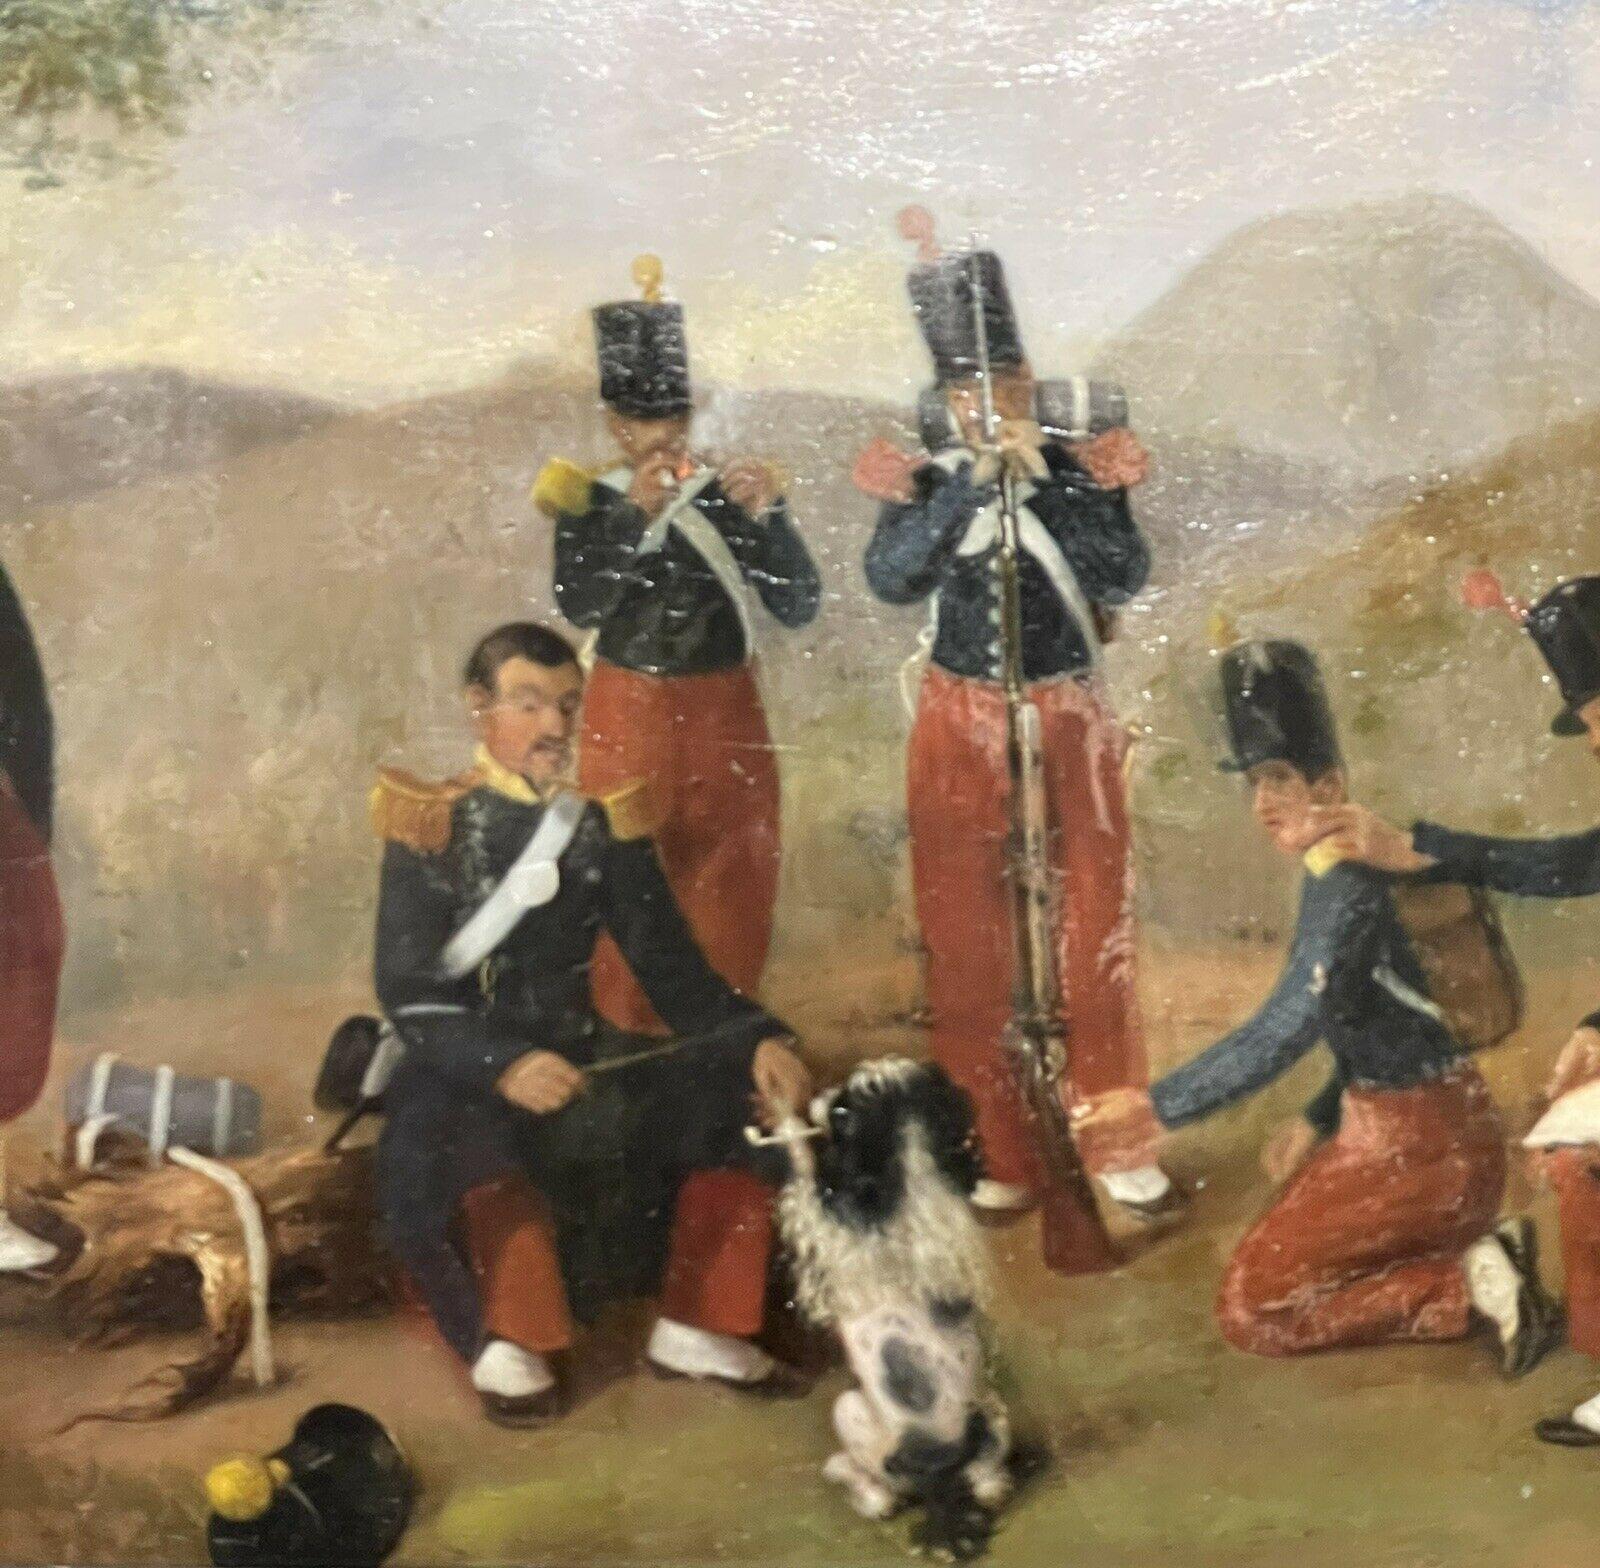 Artist/ School: French School, 19th century

Title: The Soldiers Camp

Medium:  oil painting on thick wooden panel, with a bevel edge

Size:  painting: 12.5 x 22 inches, frame: 16.5 x 26 inches

Provenance: private collection, France

Condition: The